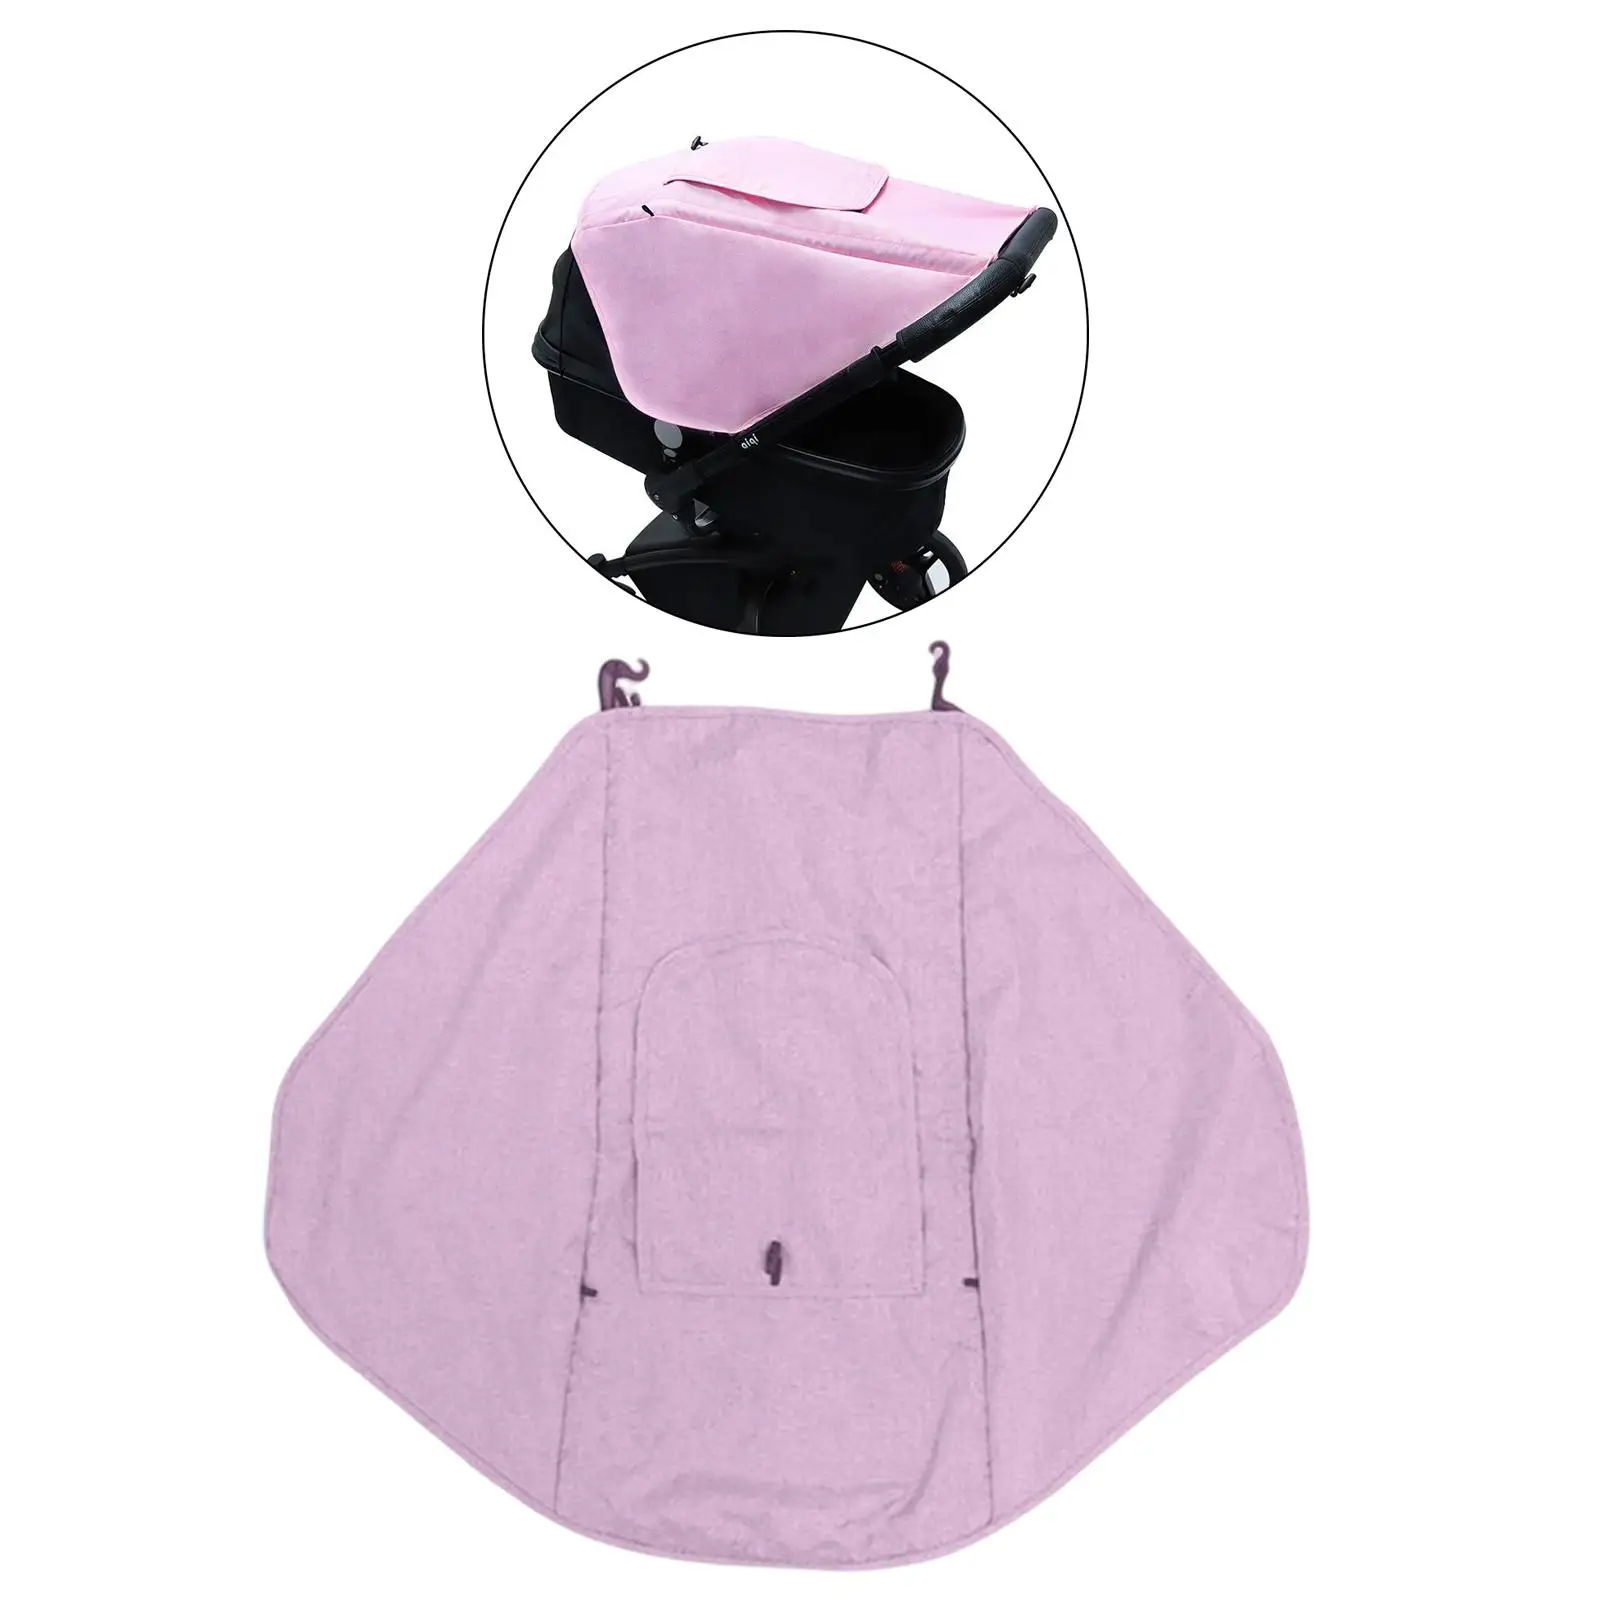 Durable Stroller sun shade Adjustable with Viewing Window for Pram Infants